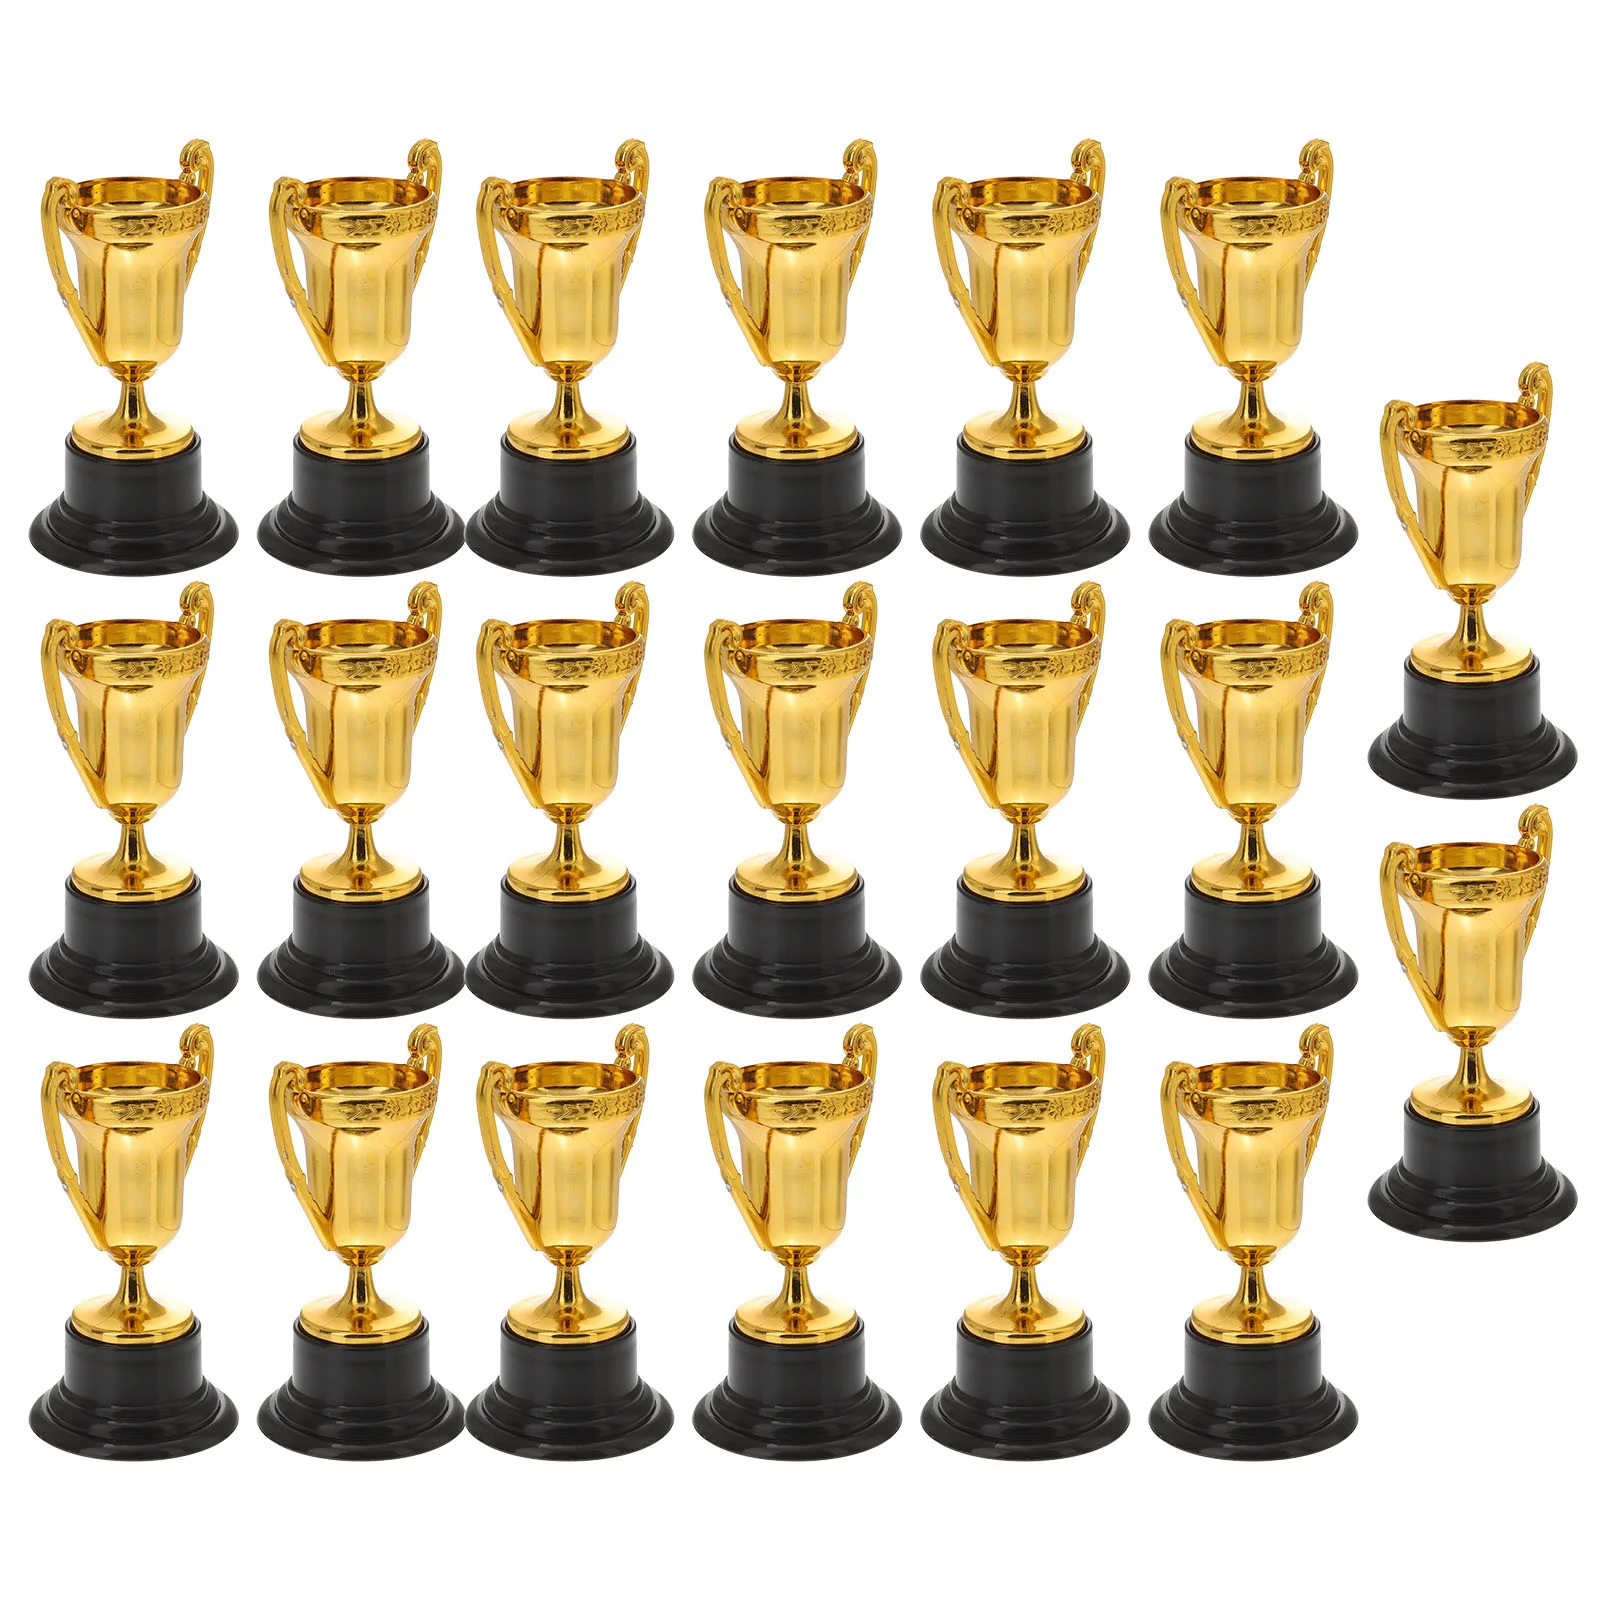 

20Pcs Award Trophies Participation Awards Small Soccer Gifts with Base Achievement Prize Award for Sports Tournaments